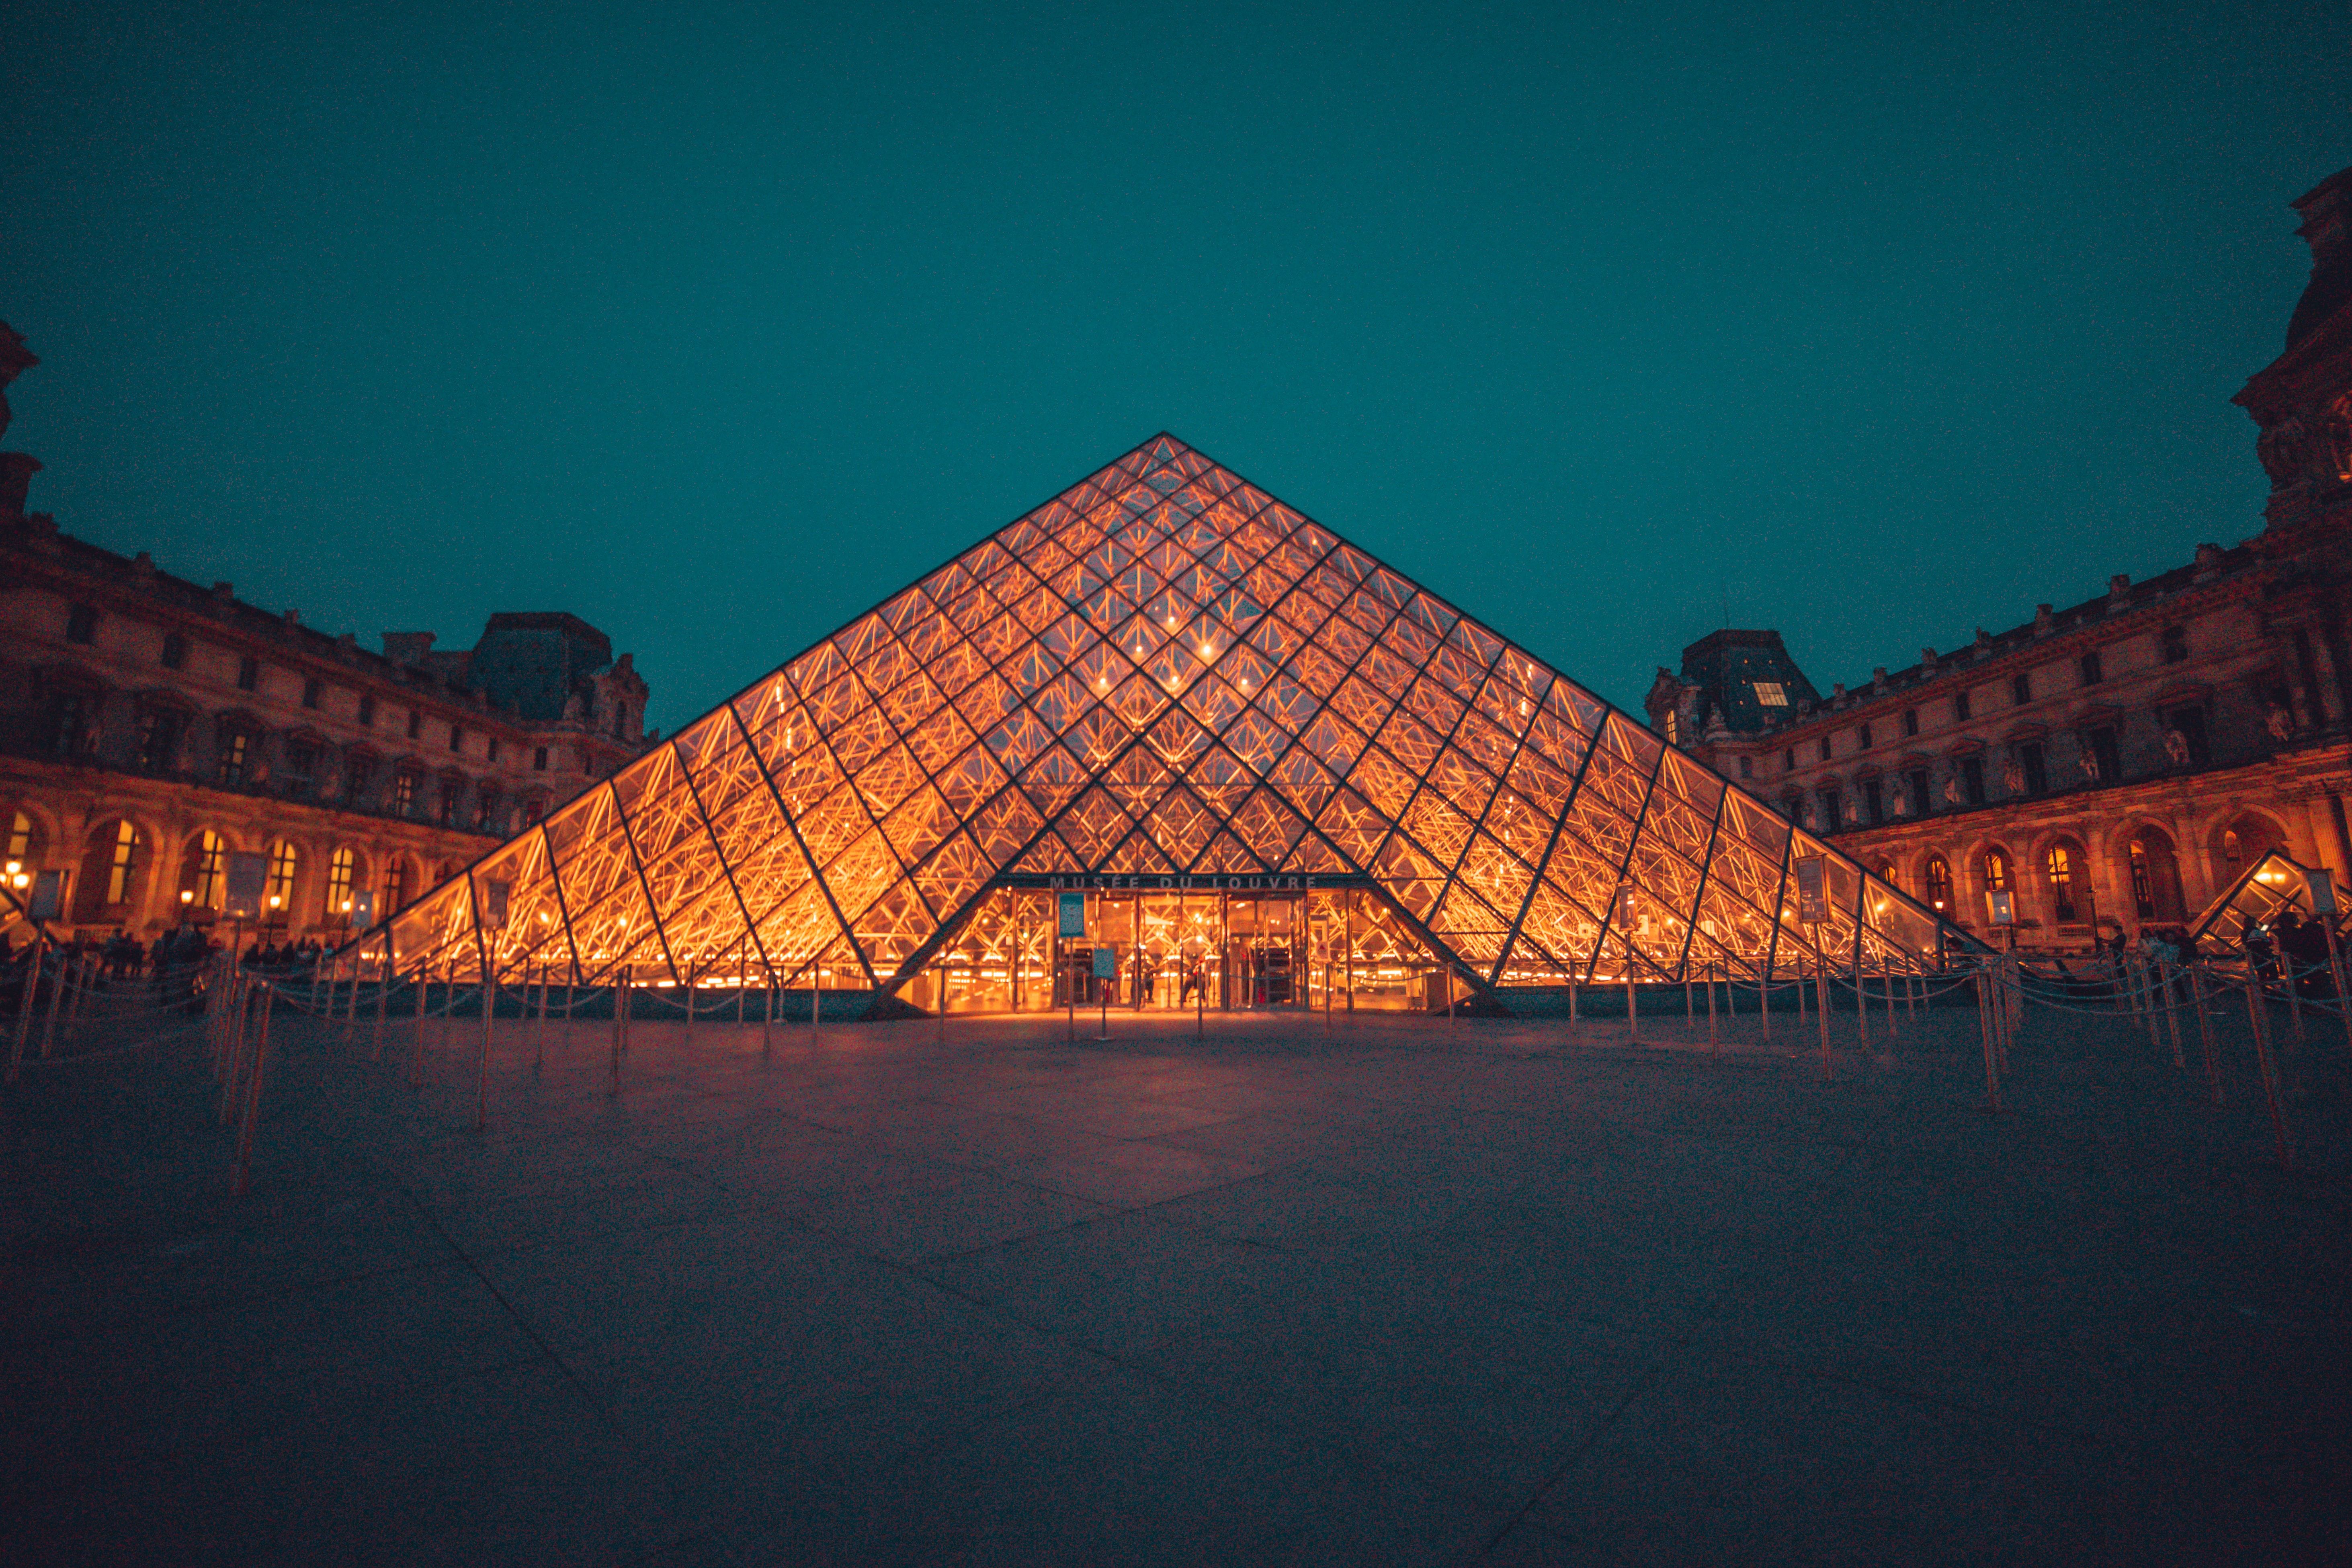 The Louvre Museum Pyramid at night in Paris, France